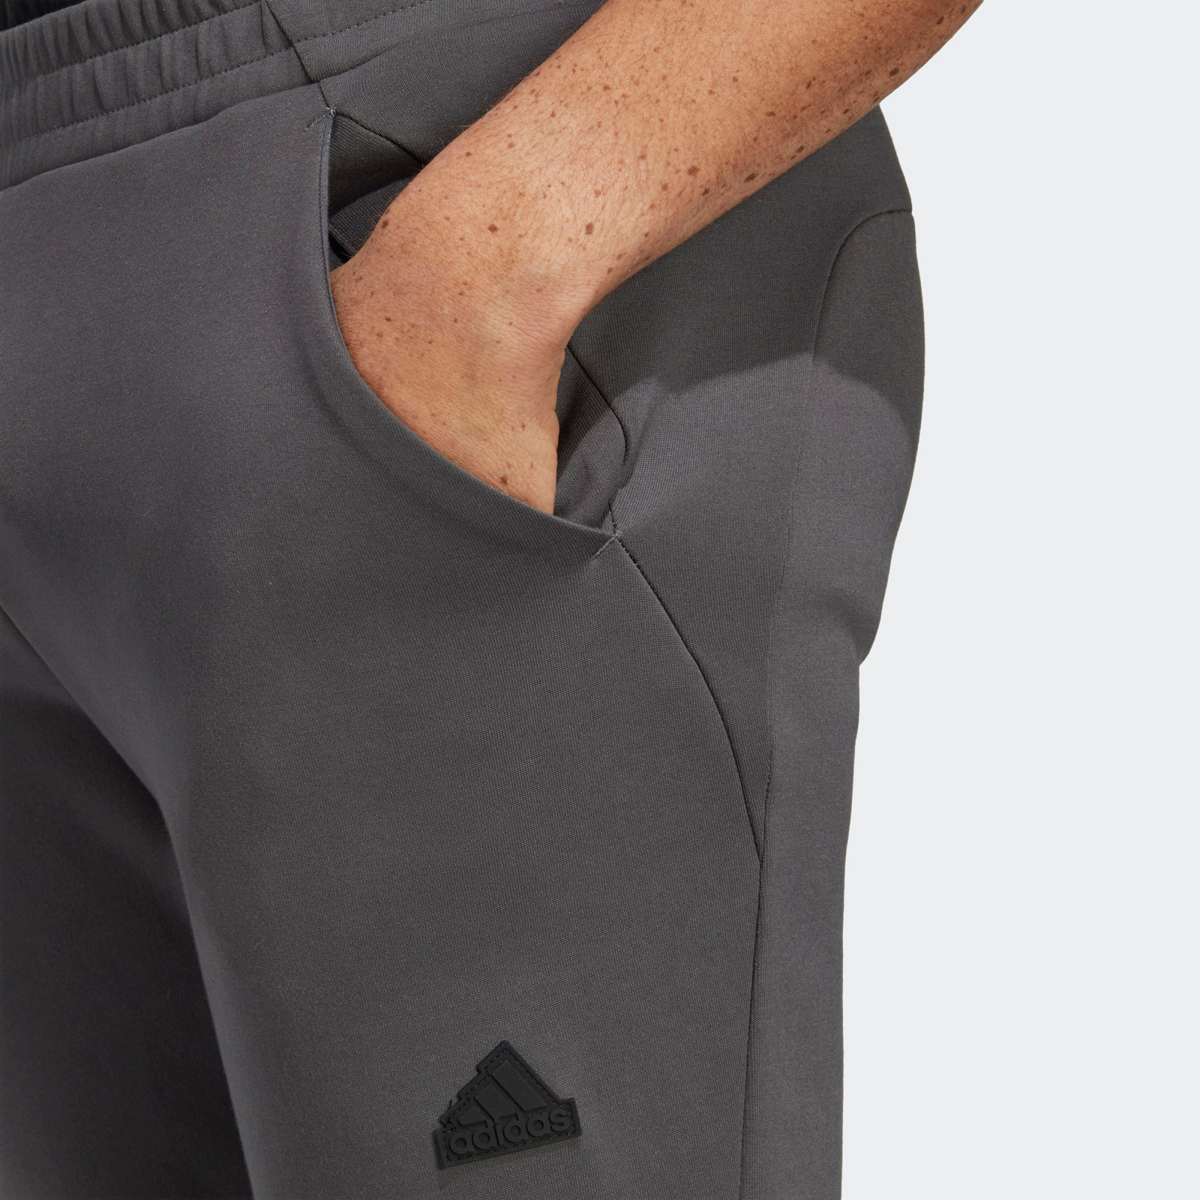 adidas-Designed-for-Gameday-Pants-Grey-1